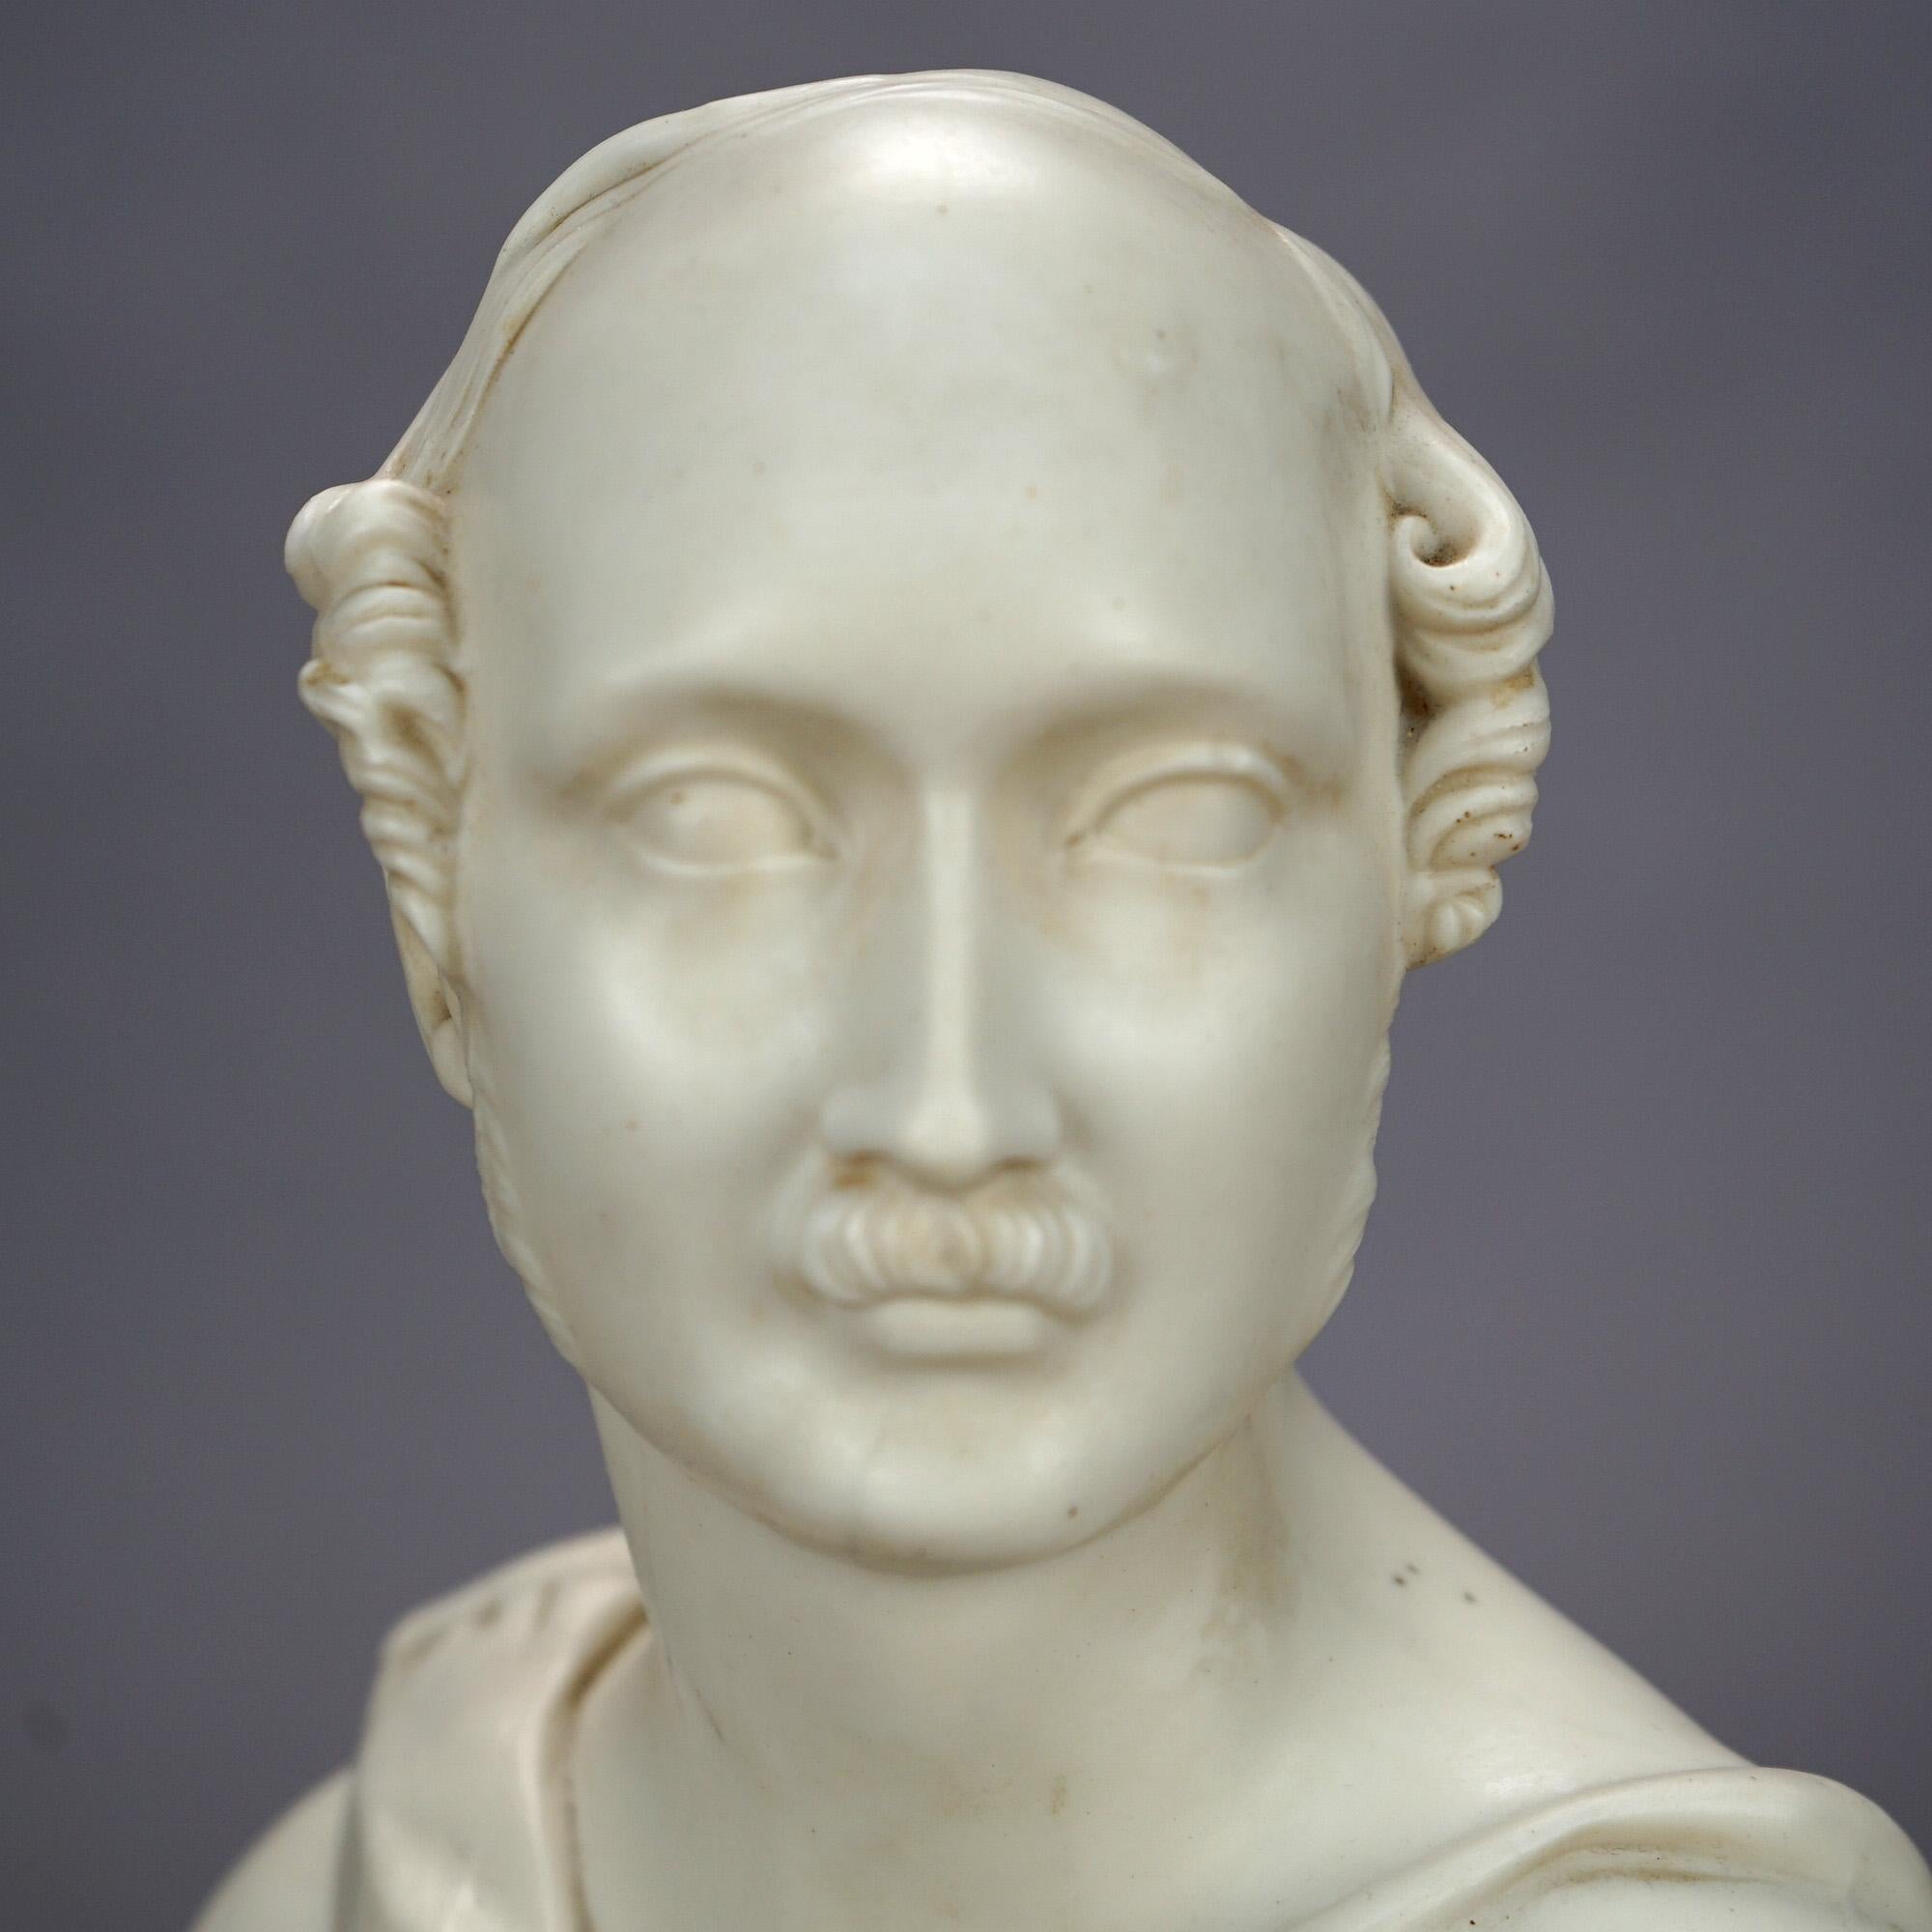 An antique bust marked B. J. Jones, Worcester offers parian porcelain construction and depicts a man with a distinguishing honor medal, raised on circular plinth, maker mark on base as photographed, 19th century.

Measures: 12.75'' H x 8.5'' W x